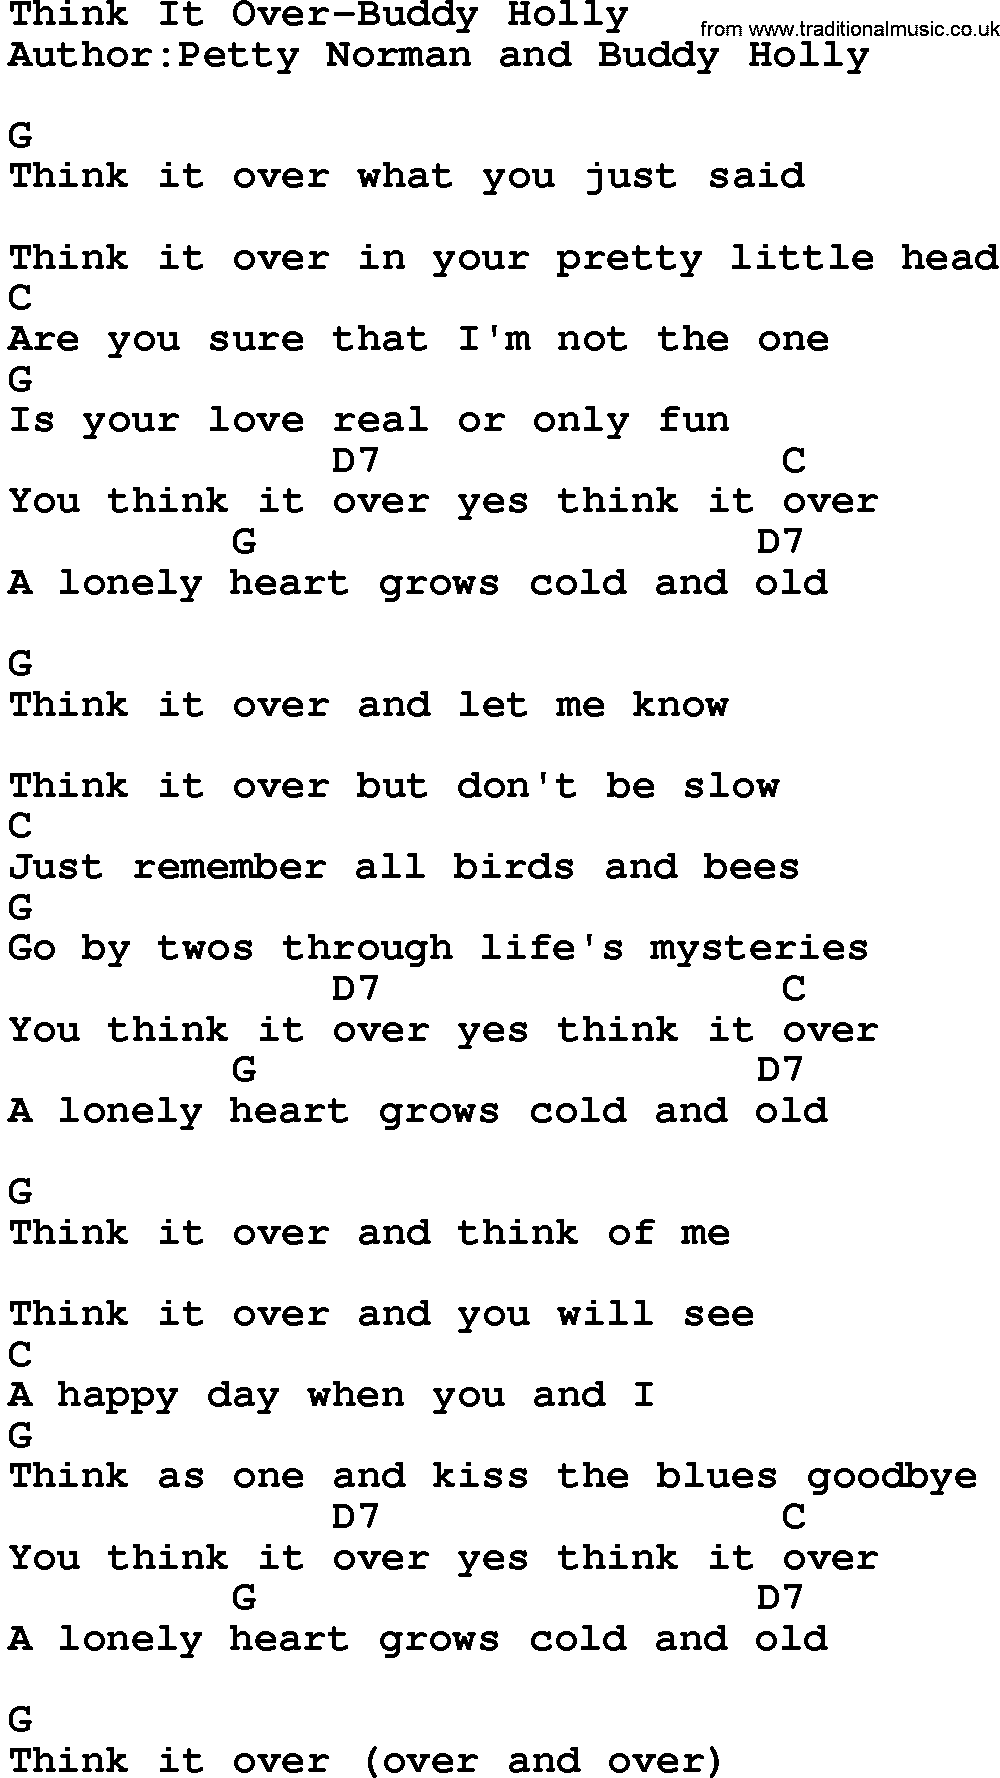 Country music song: Think It Over-Buddy Holly lyrics and chords